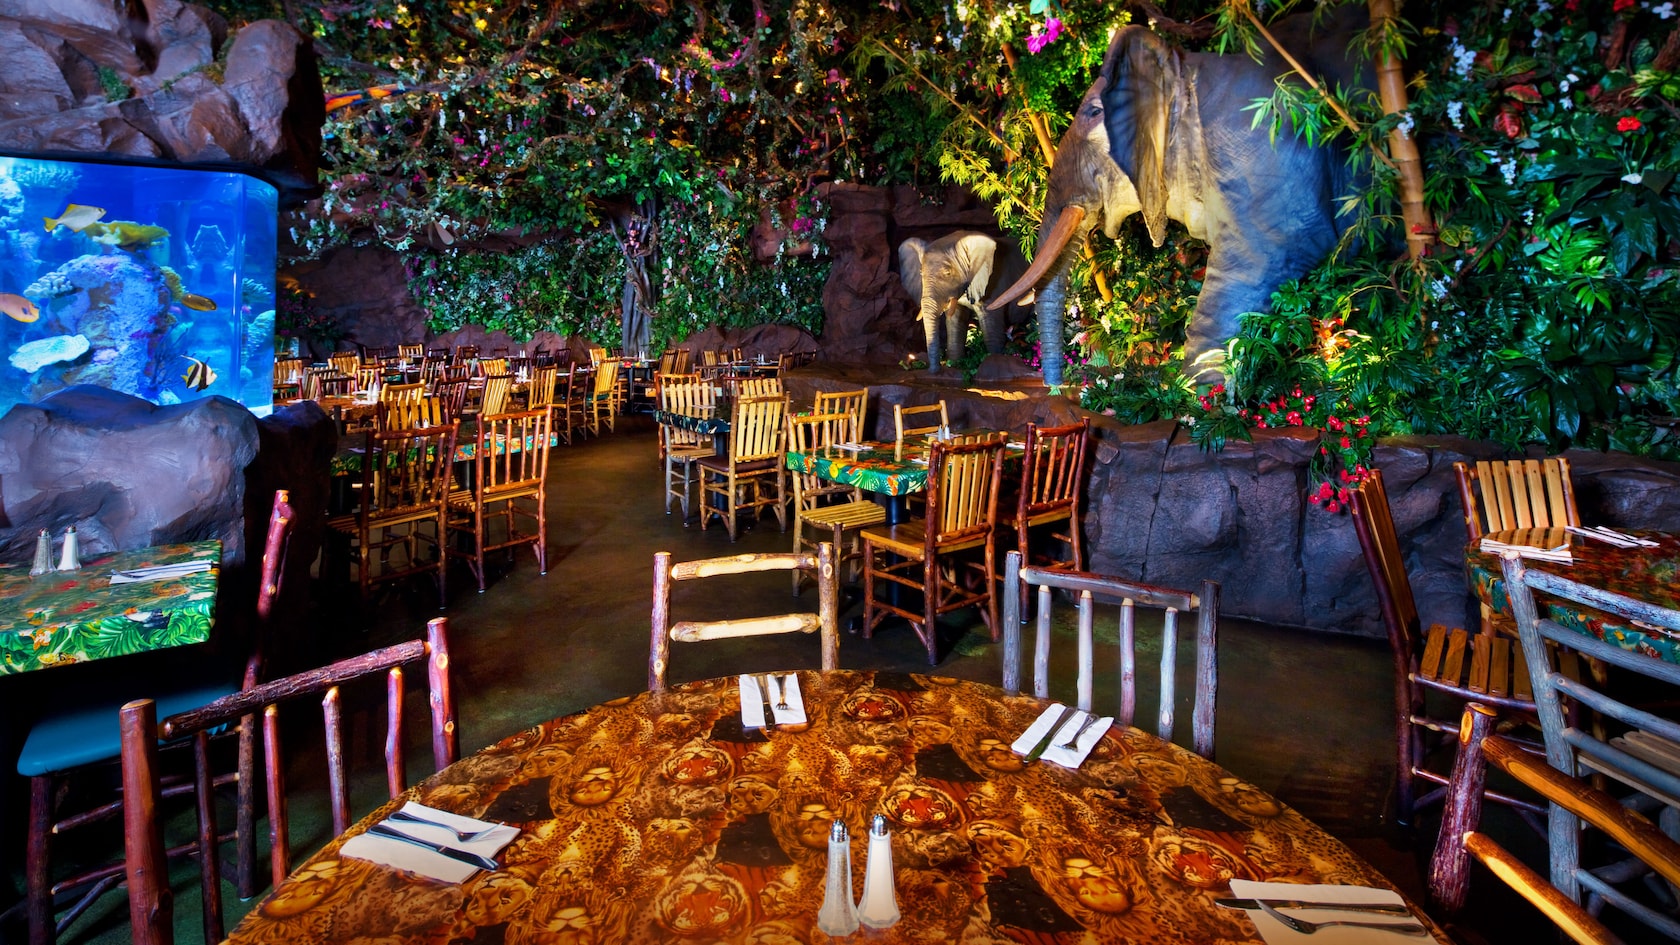 Rainforest Café Dining Review- Enjoy Themed Dining Kids Will Love in Animal  Kingdom and Disney Springs